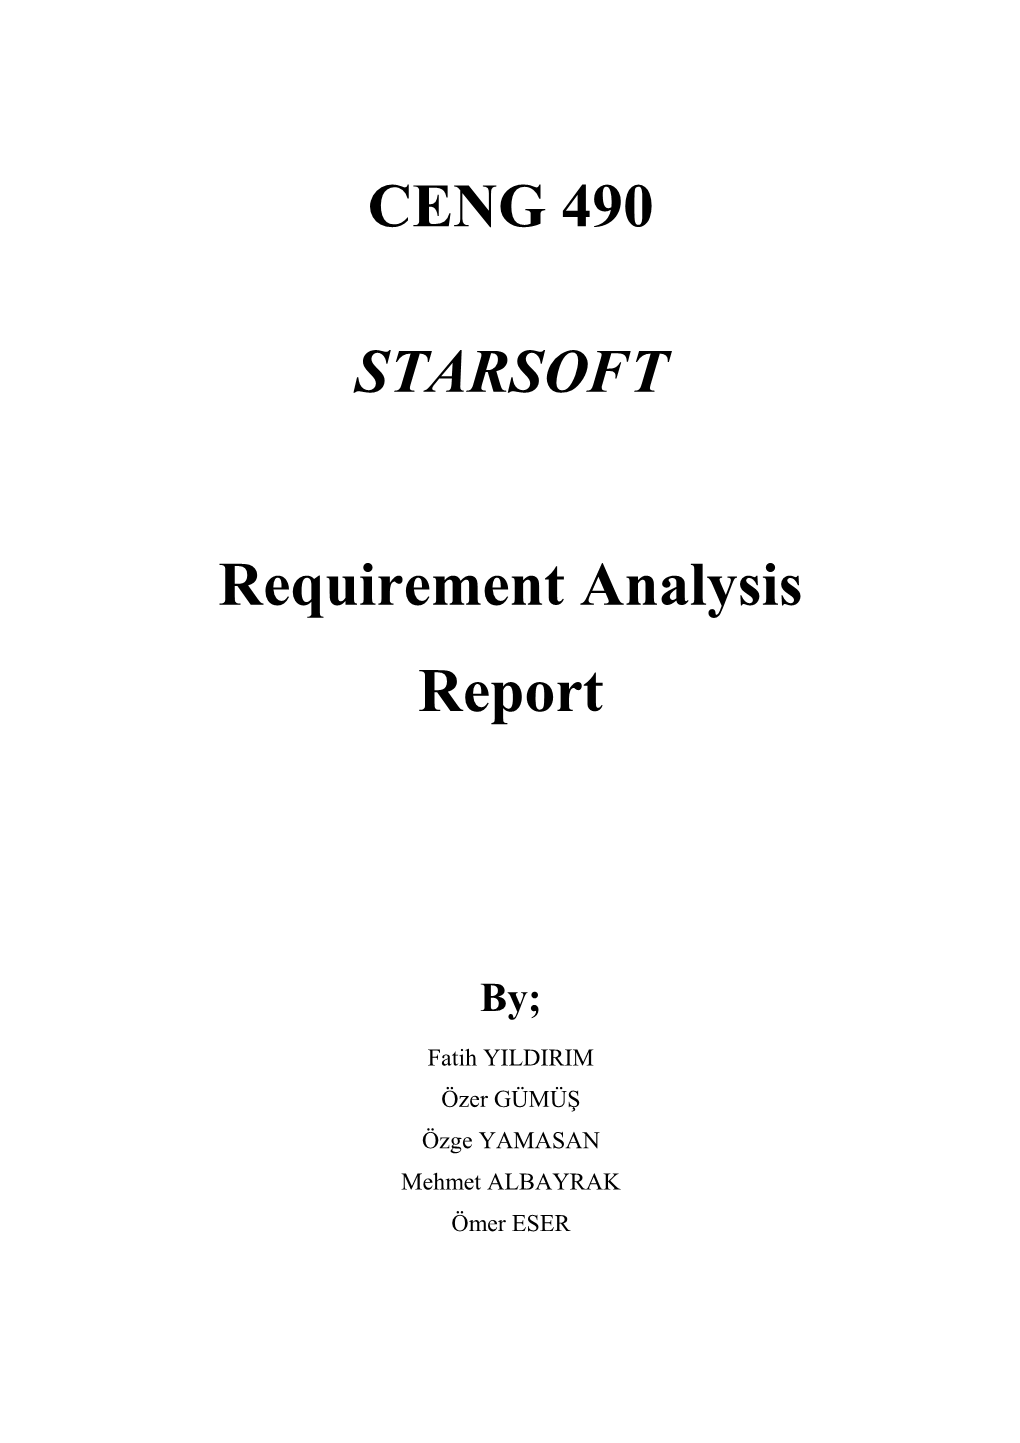 Requirement Analysis Report